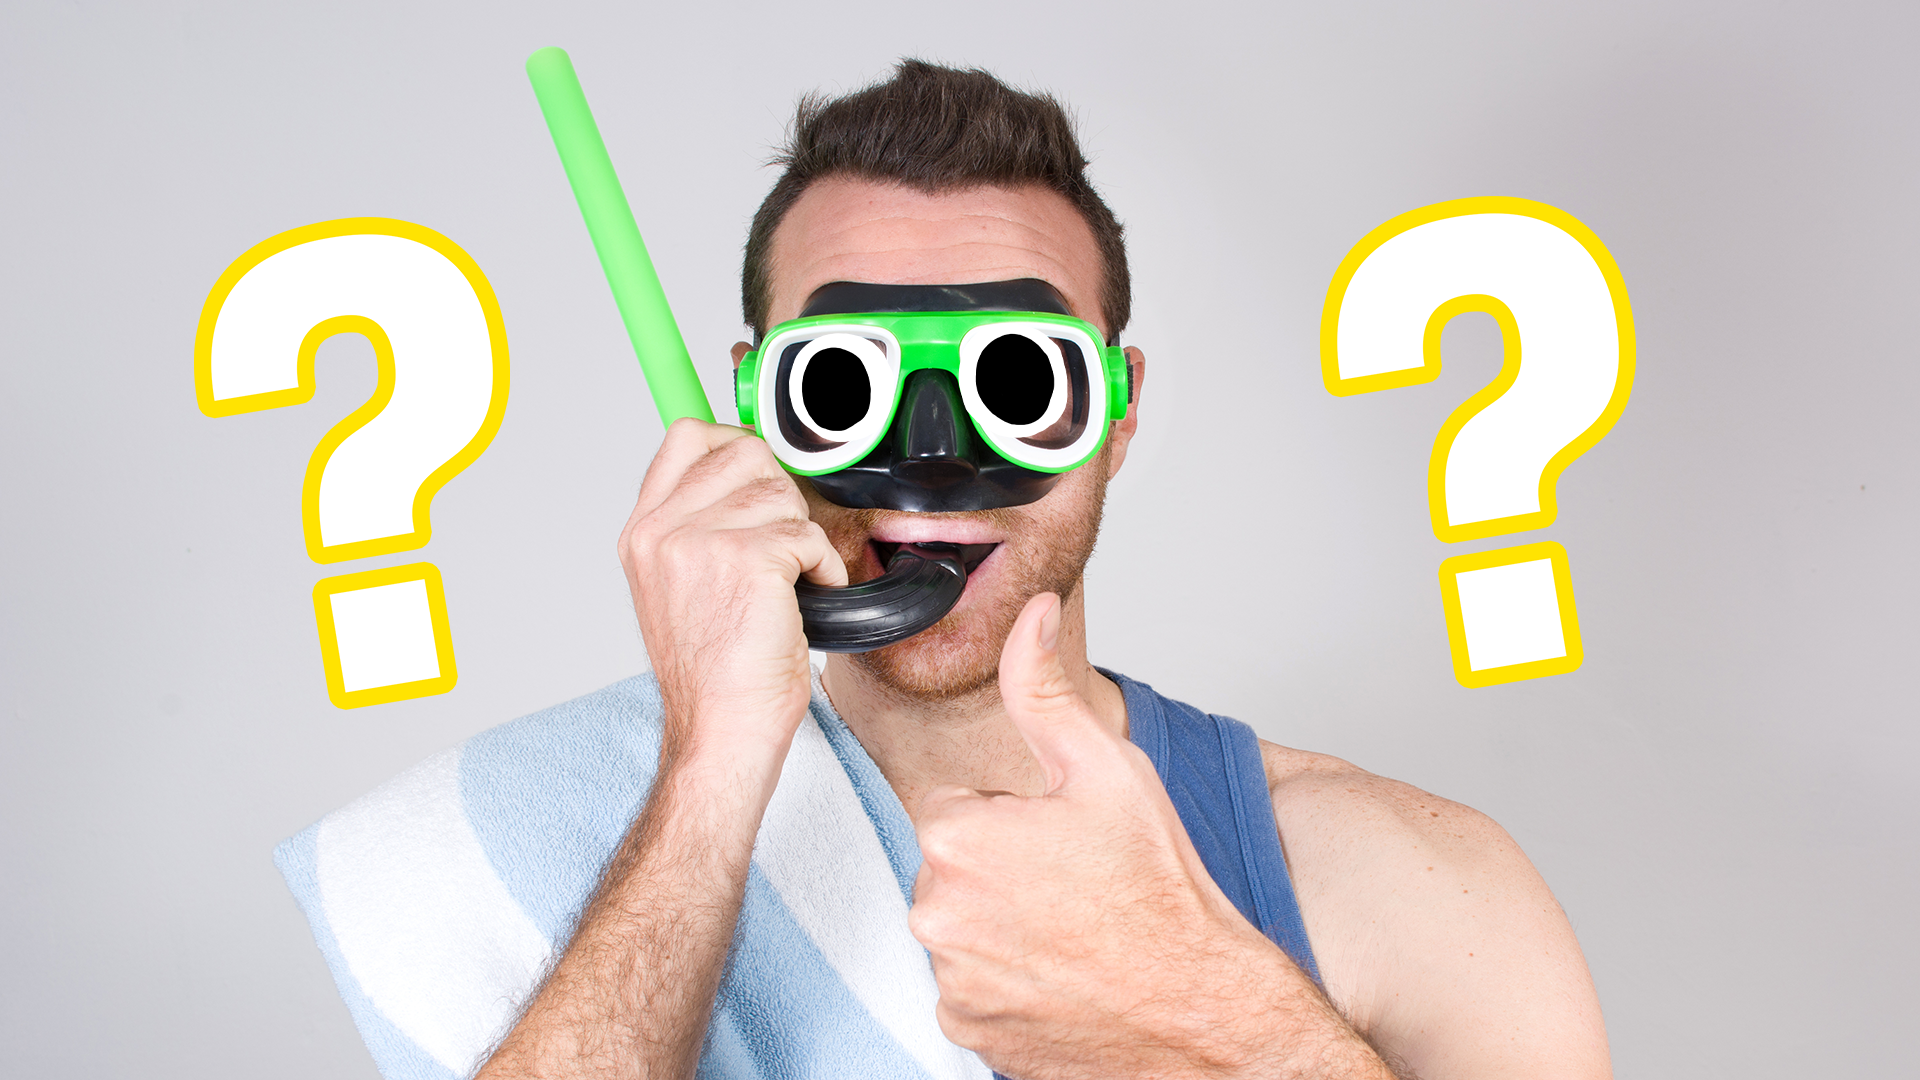 Man in snorkel mask with question marks